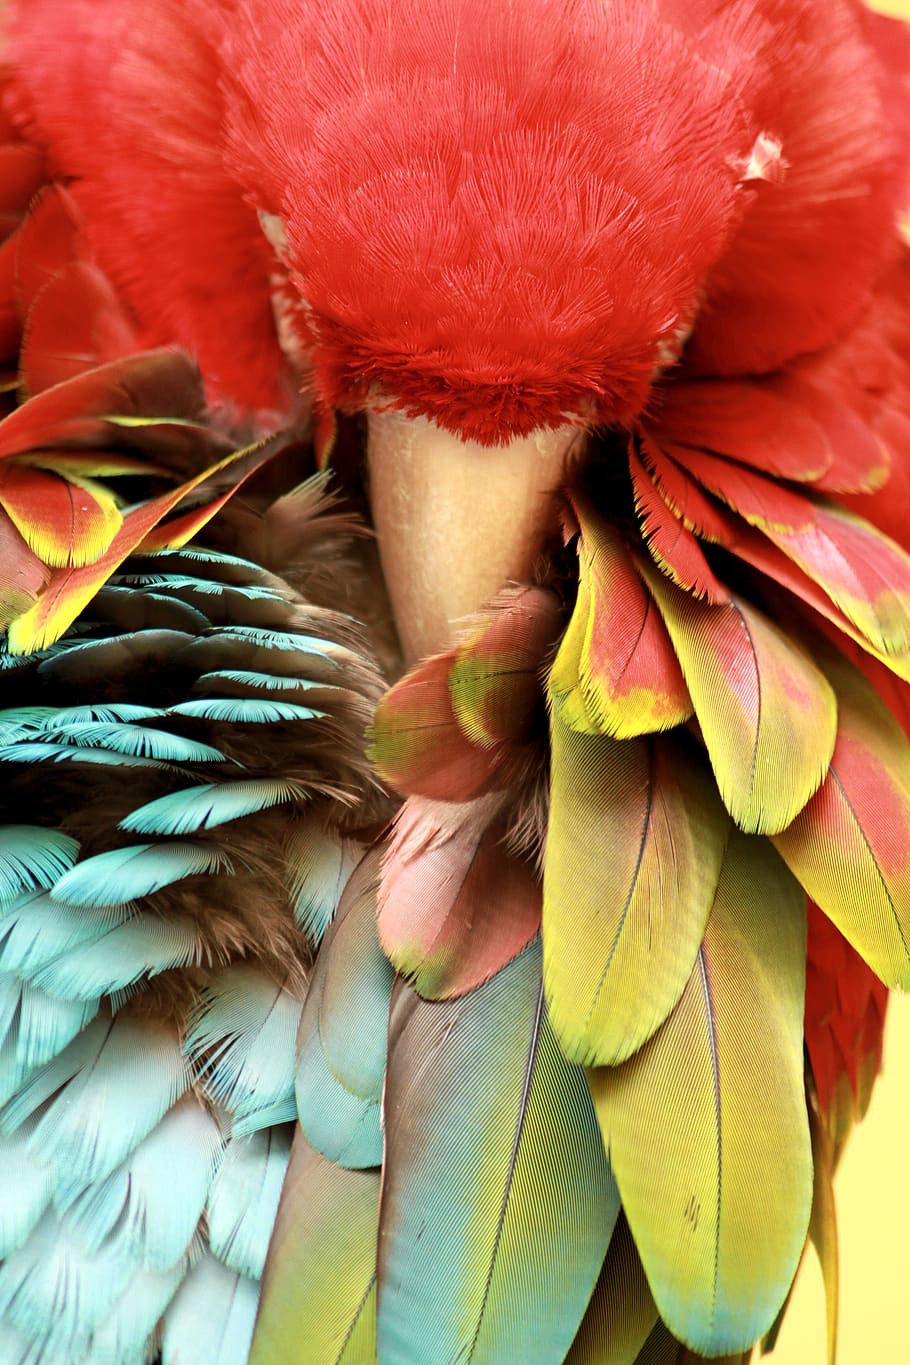 parrot, sleeping, bird, animal, nature, tropical, close-up, feather, day, red